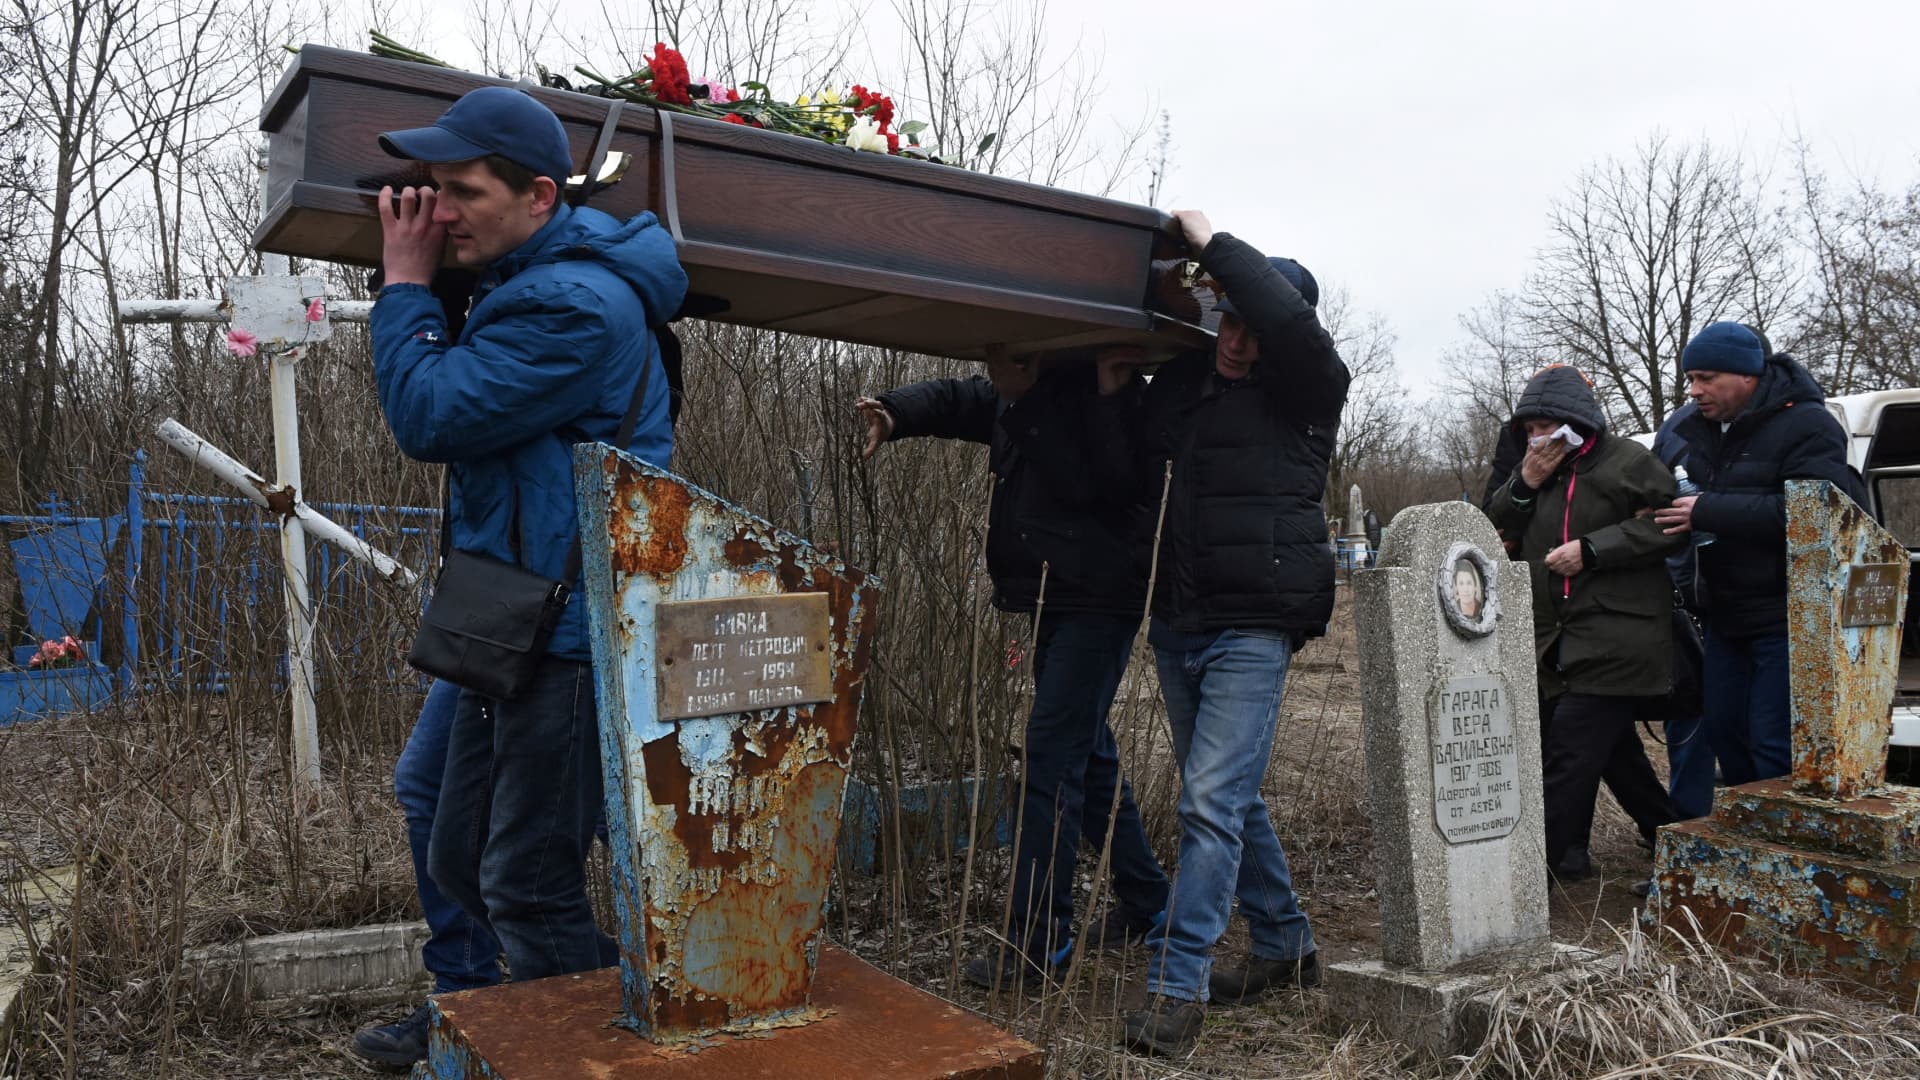 Men carry the coffin during a funeral of school teachers Yelena Ivanova and Yelena Kudrik, who were killed by shelling, at a cemetery in the separatist-controlled town of Horlivka (Gorlovka) in the Donetsk region, Ukraine, February 28, 2022.